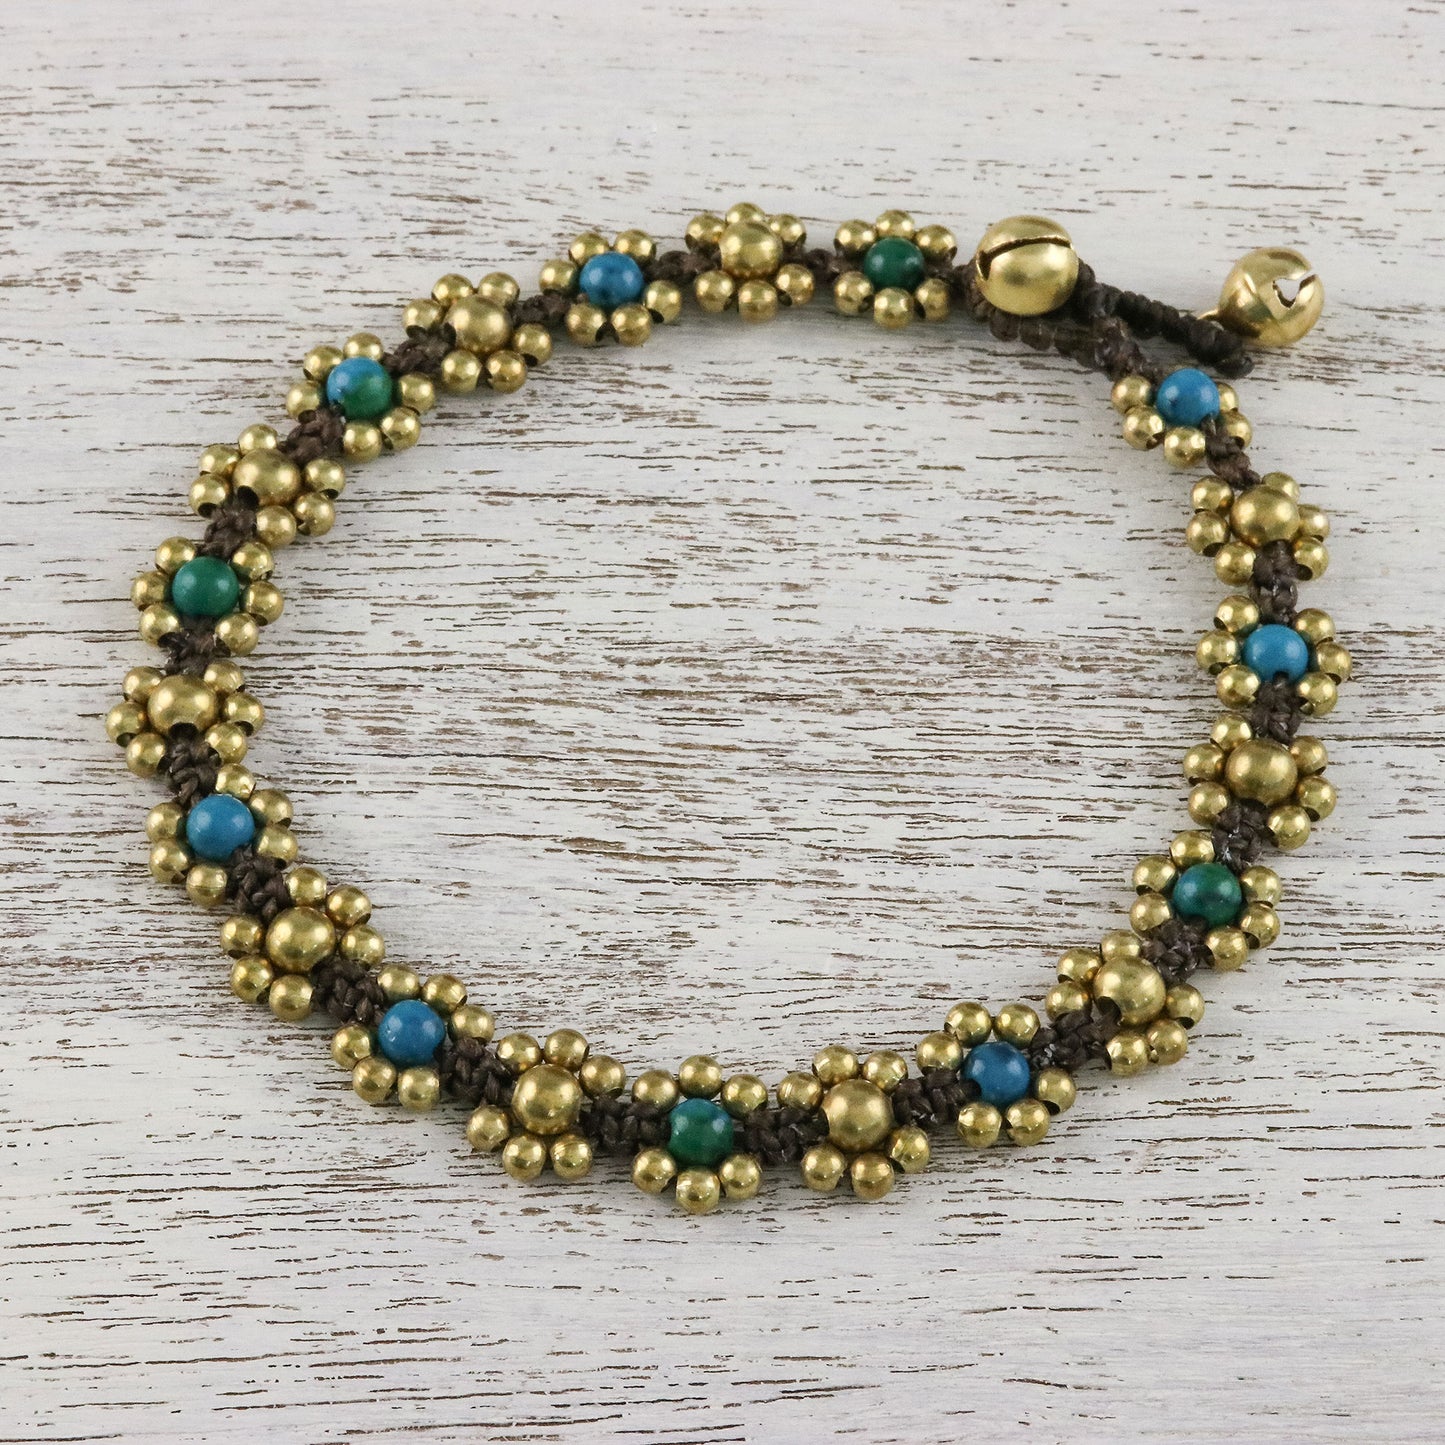 Musical Dream Serpentine Adjustable Beaded Anklet from Thailand